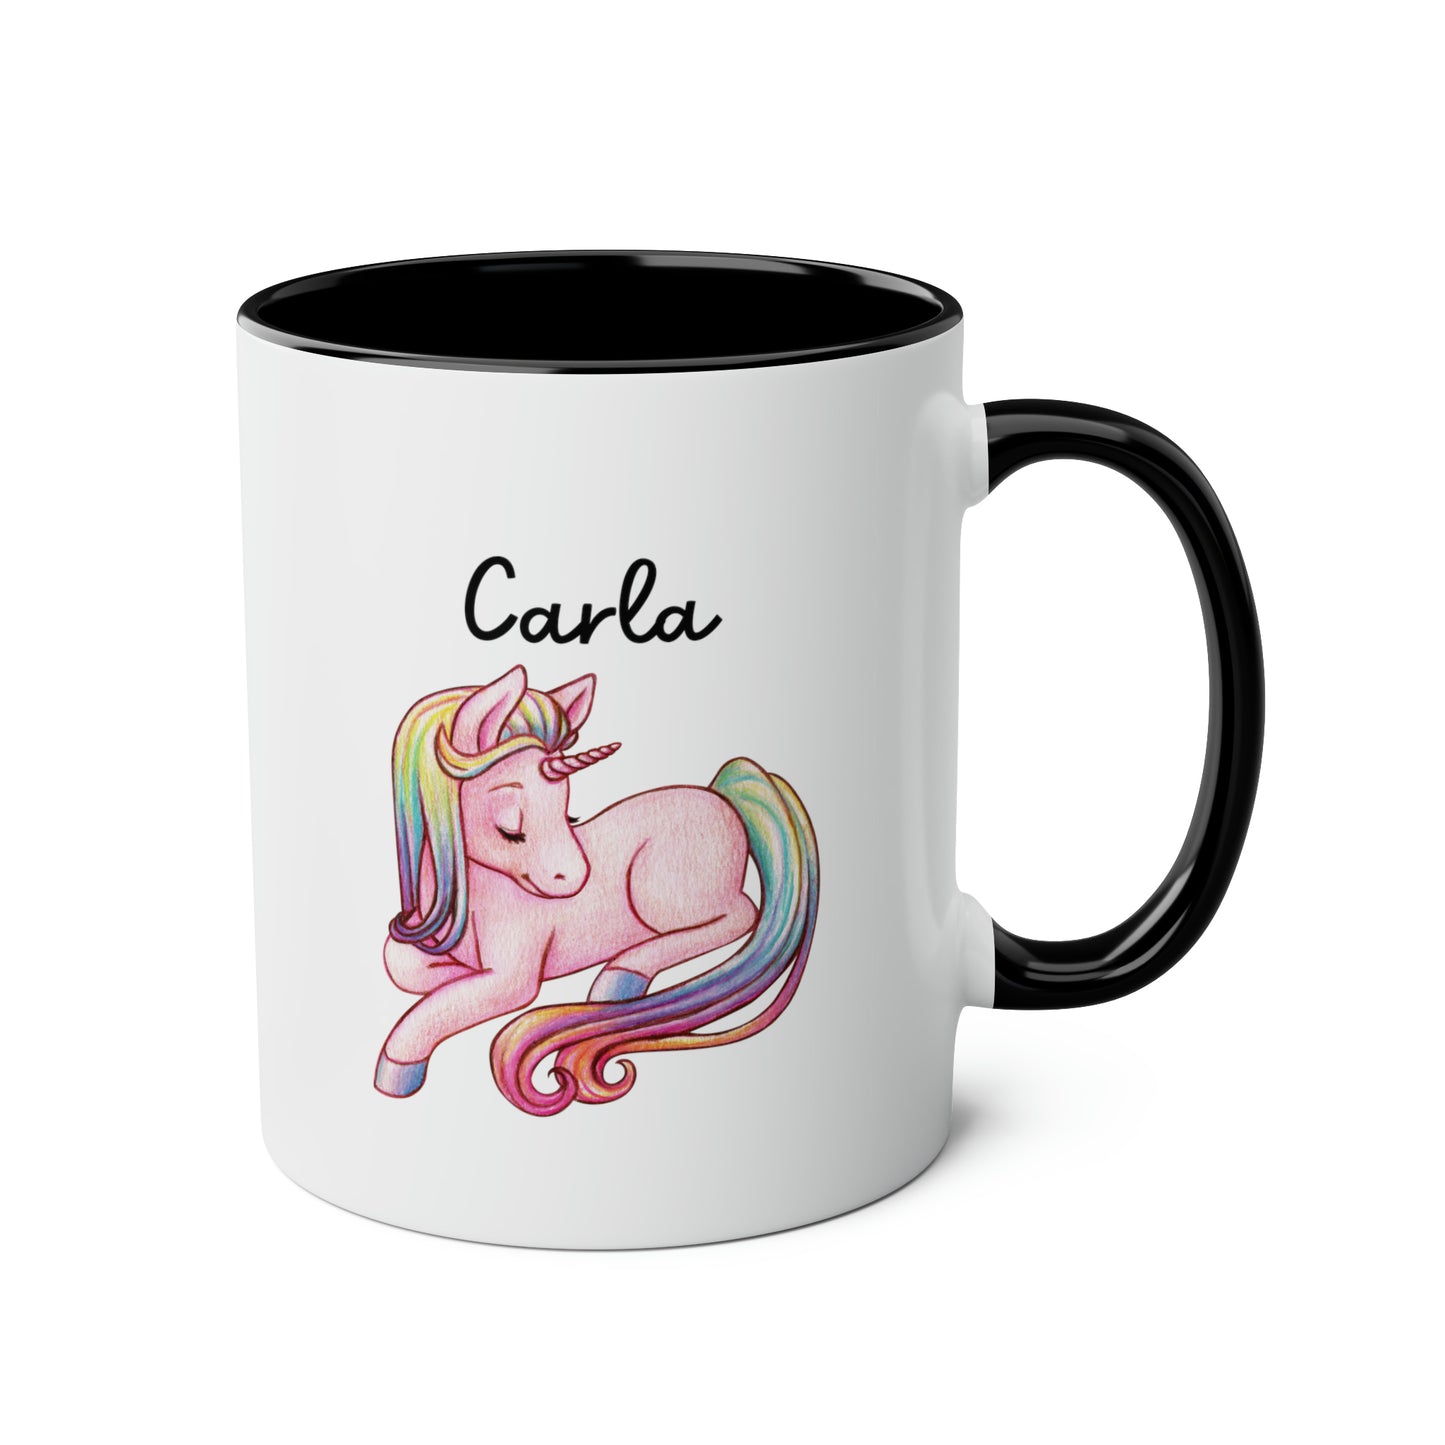 Unicorn Name 11oz white with black accent funny large coffee mug gift for kids children horse pony girls animal create your own custom customized personalized waveywares wavey wares wavywares wavy wares